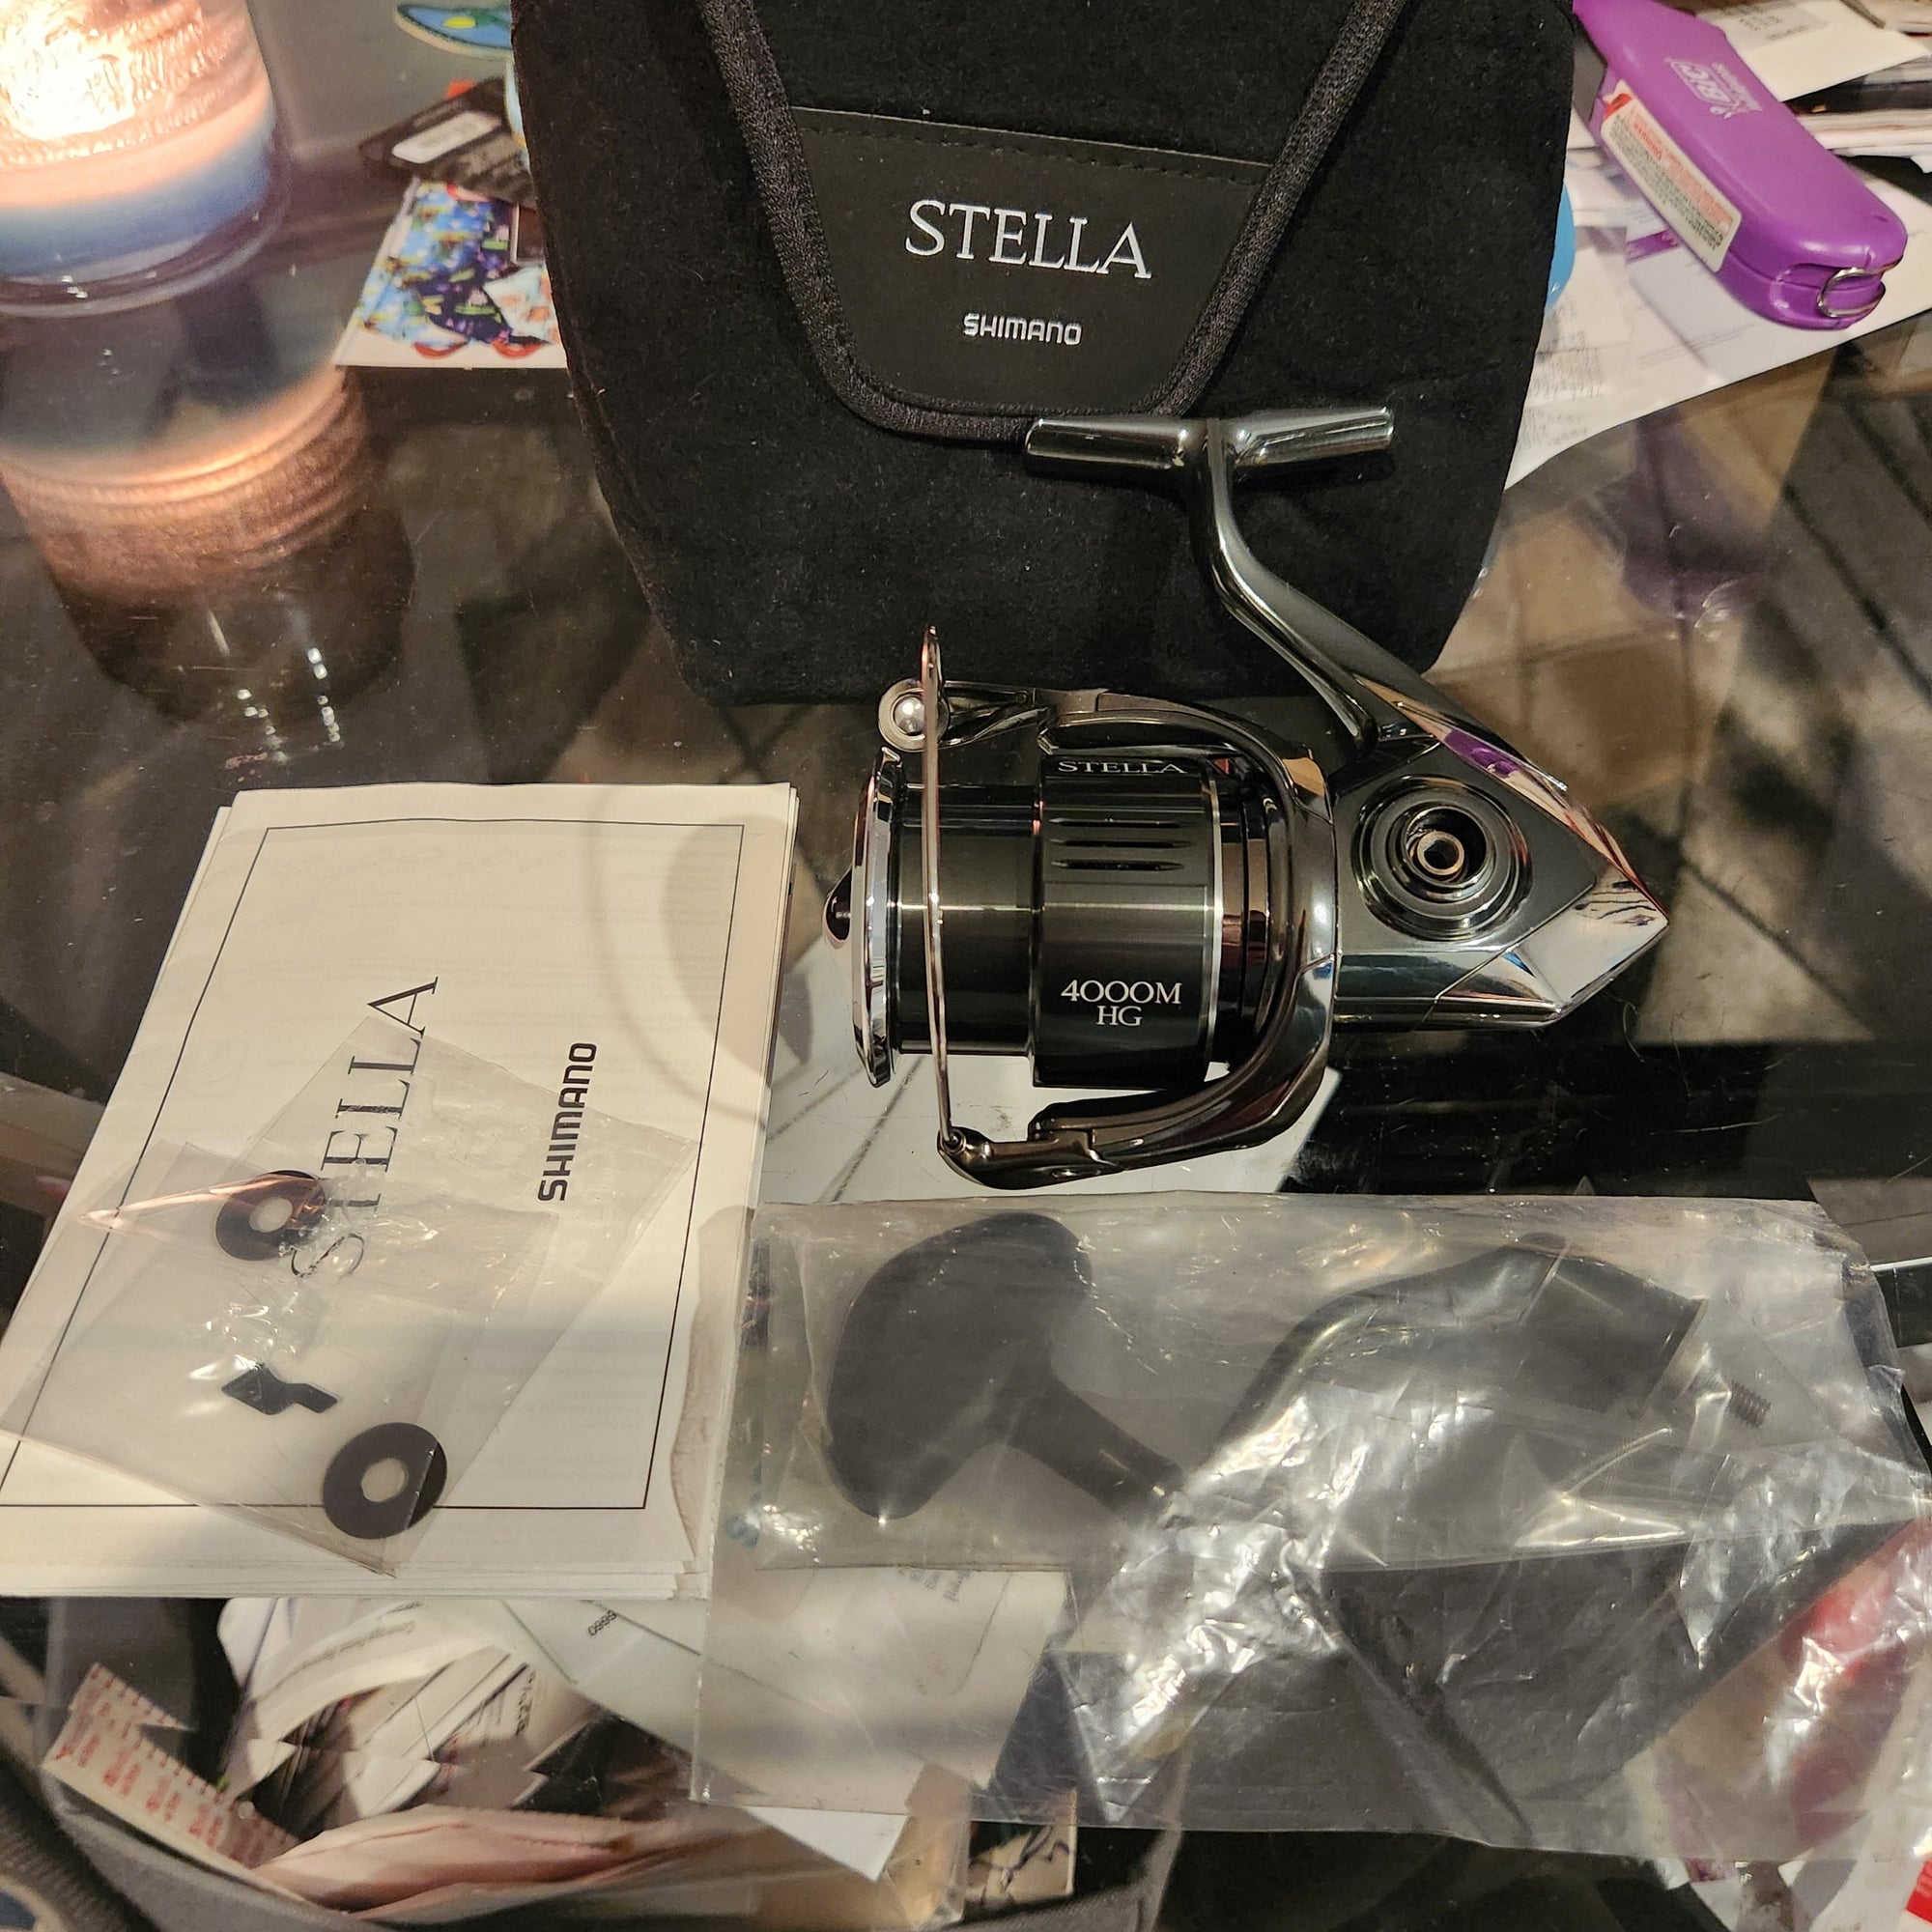 Shimano Stella 4000MHG **MINT** - The Hull Truth - Boating and Fishing Forum